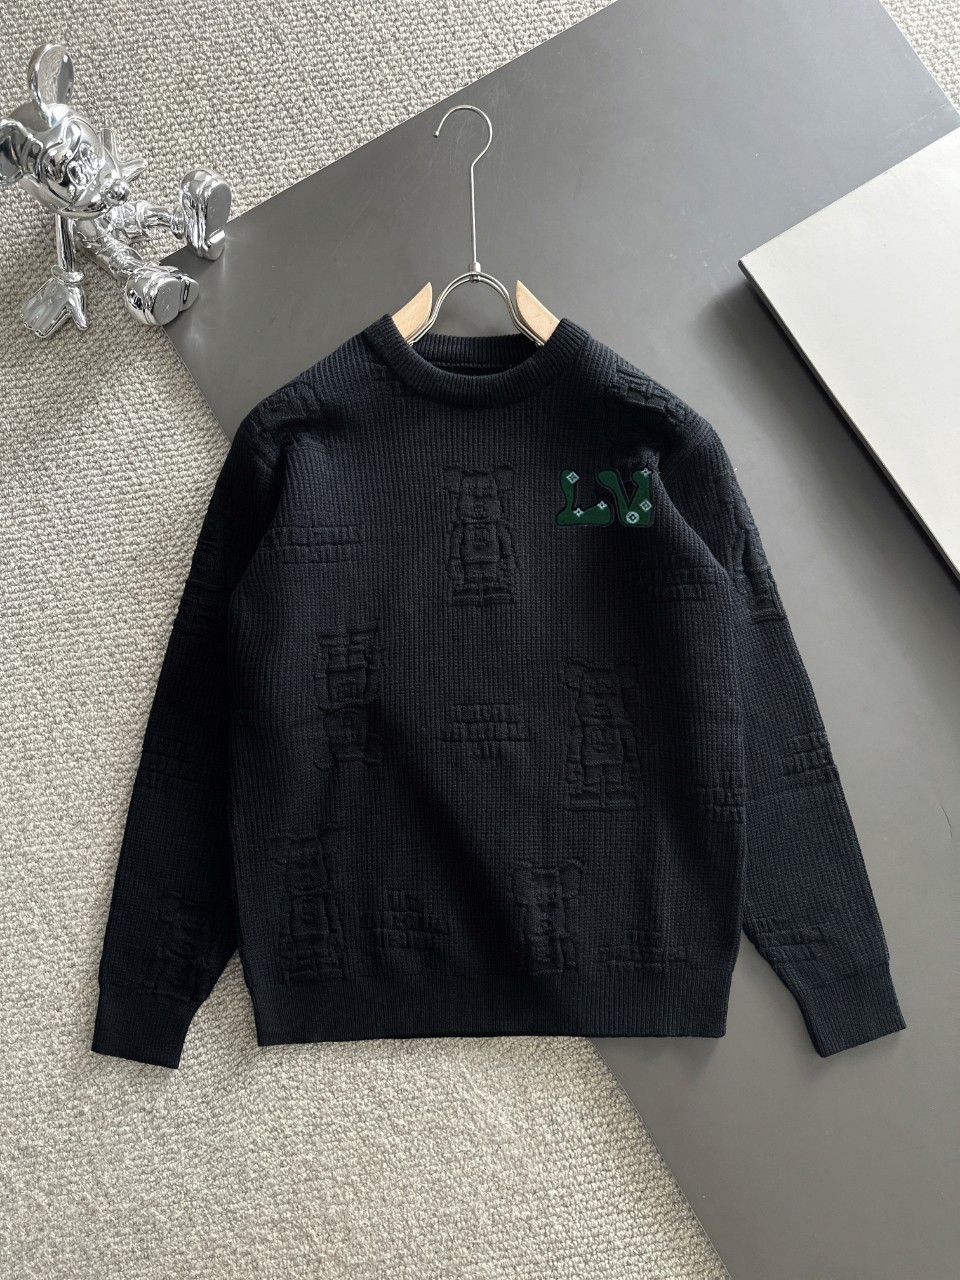 Louis Vuitton Clothing Sweatshirts Embroidery Wool Winter Collection Fashion